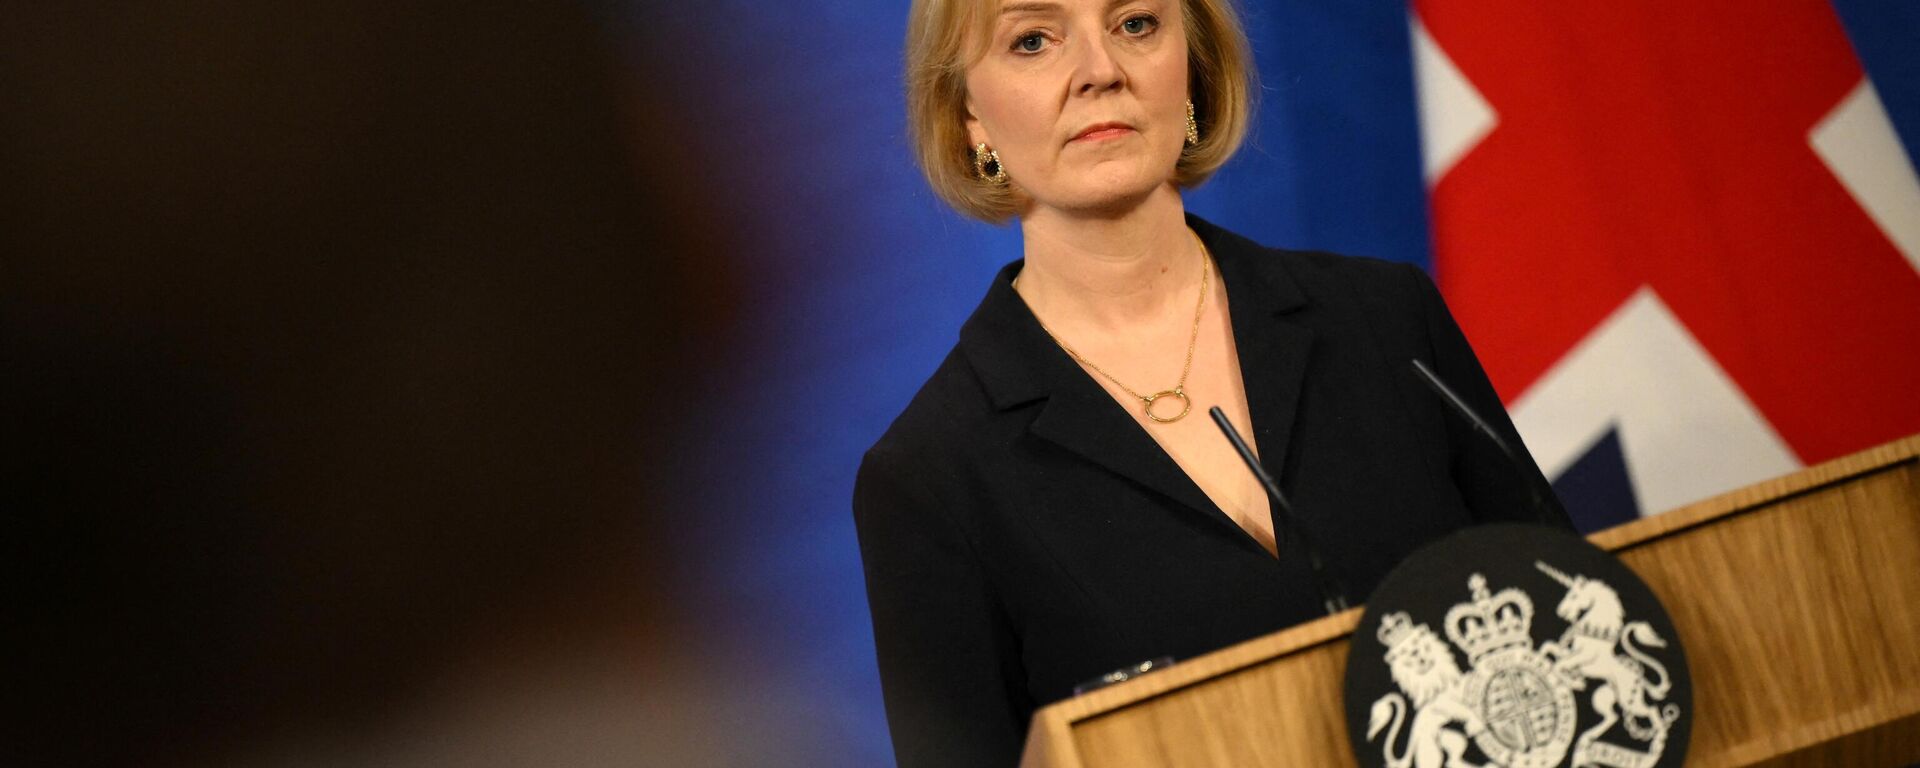 Britain's Prime Minister Liz Truss holds a press conference in the Downing Street Briefing Room in central London on October 14, 2022. - Sputnik International, 1920, 20.10.2022